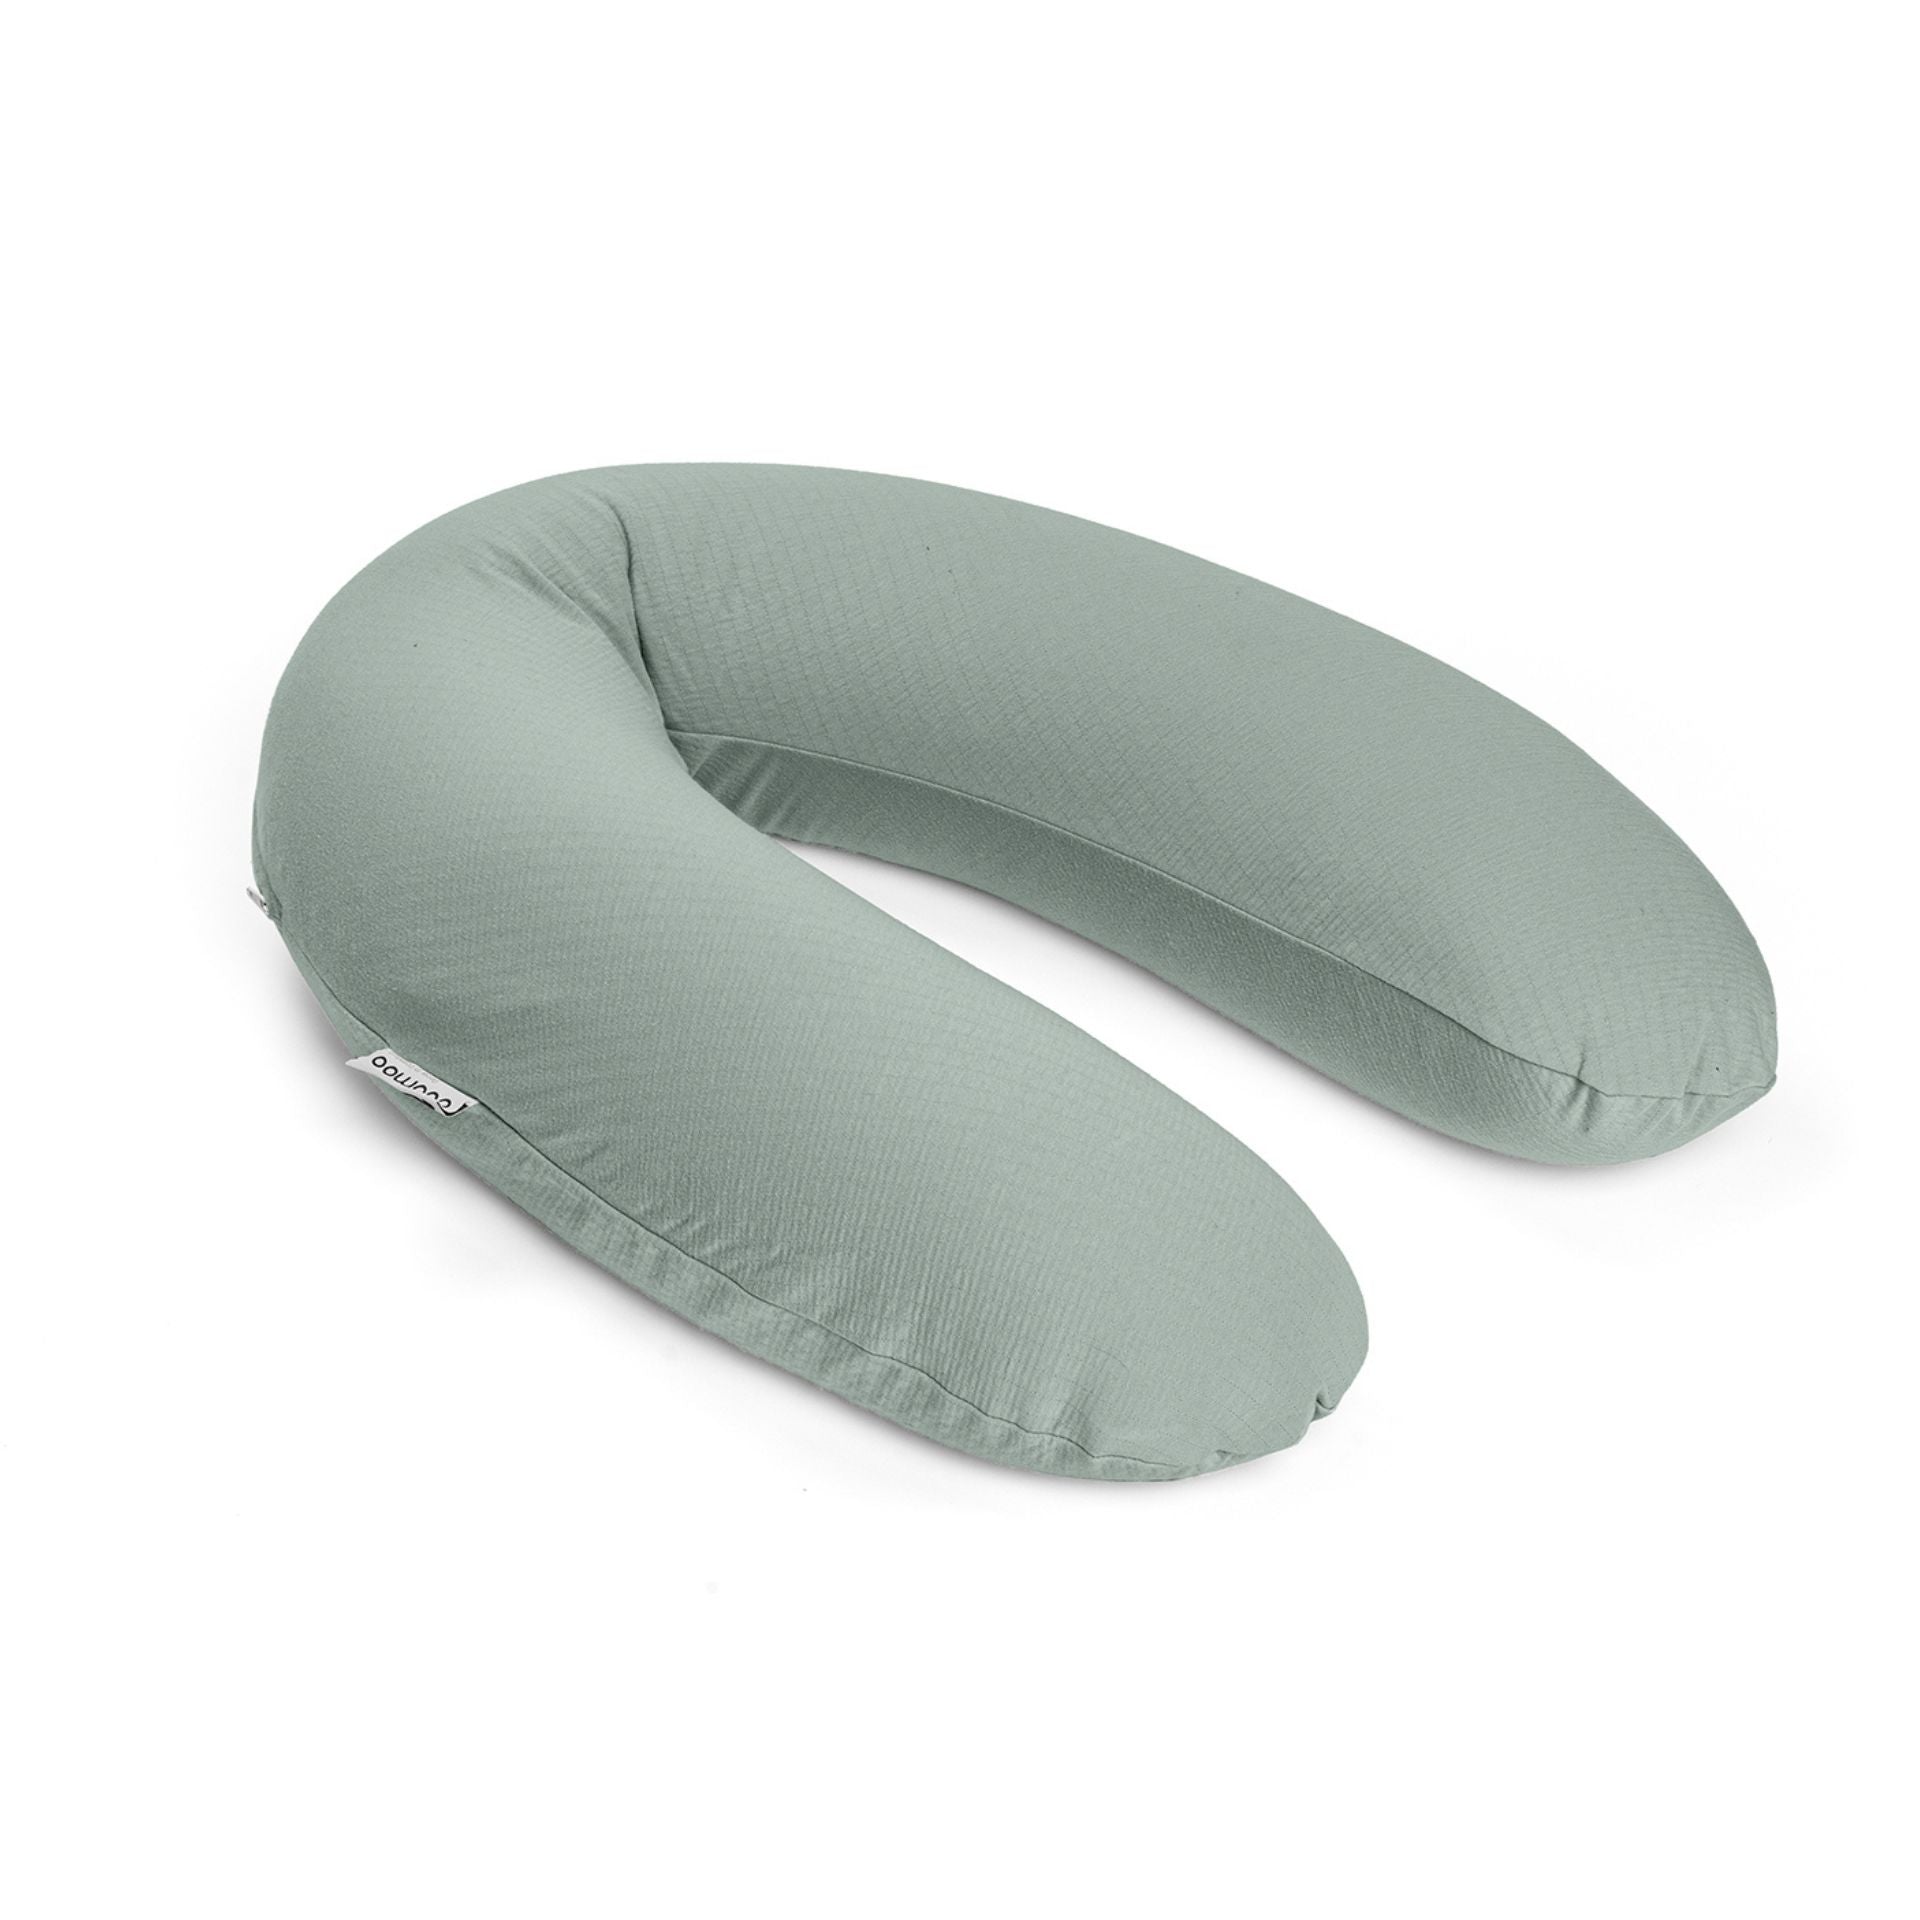 large maternity pillow. During pregnancy and for breastfeeding - doomoo Buddy Tetra Jersey green